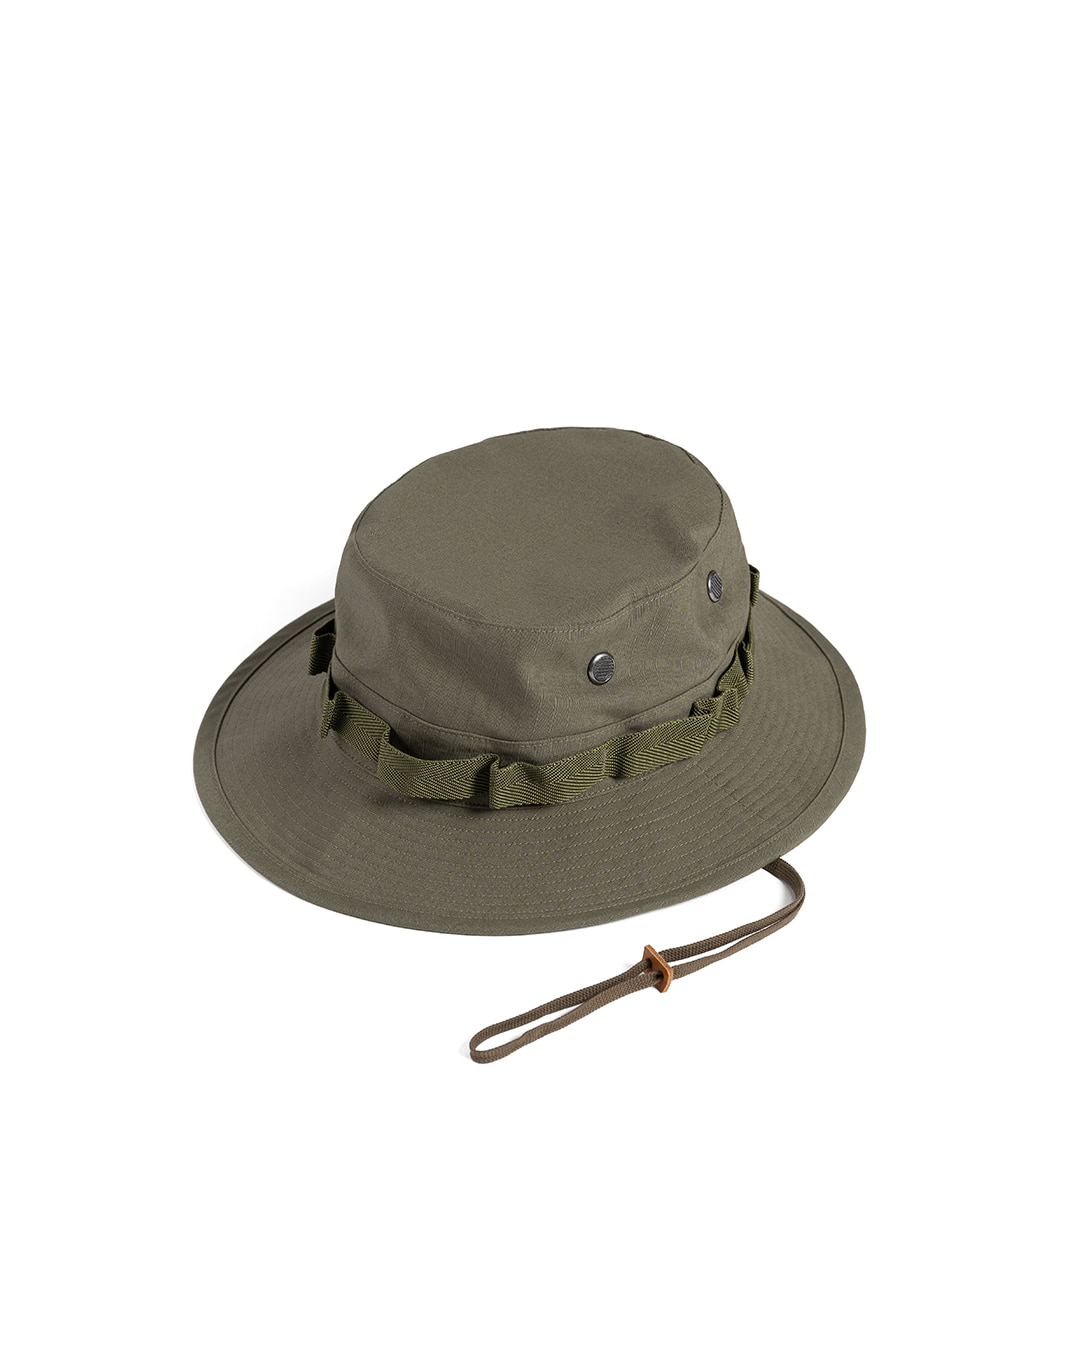 US ARMY JUNGLE HAT RIPSTOP (army green)